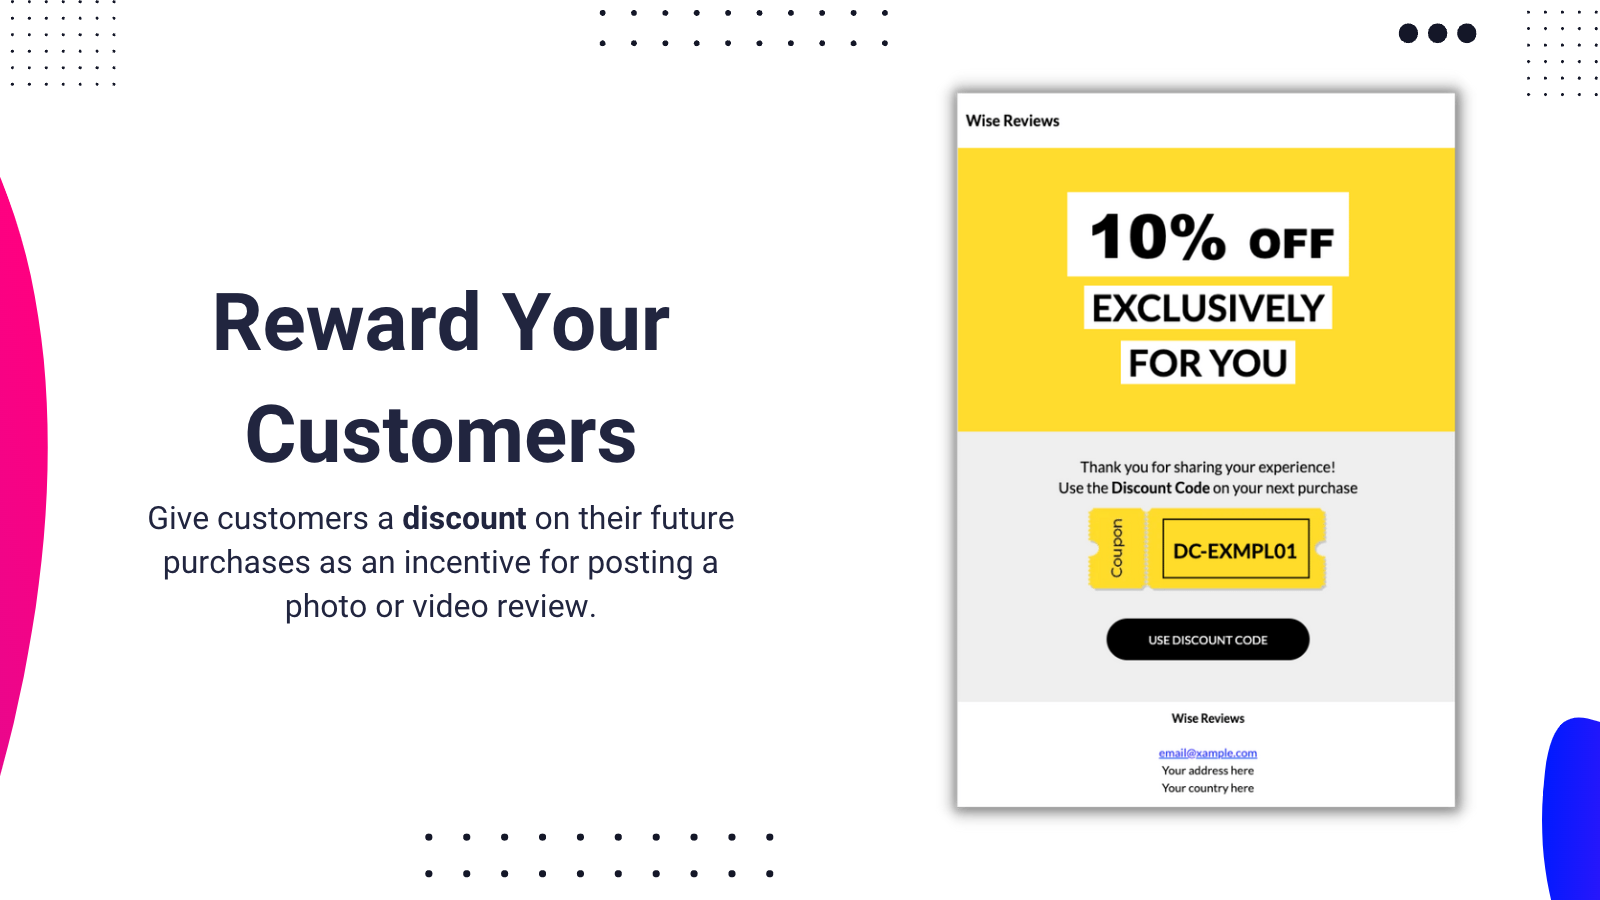 Rewards - Give customers a discount for posting reviews.